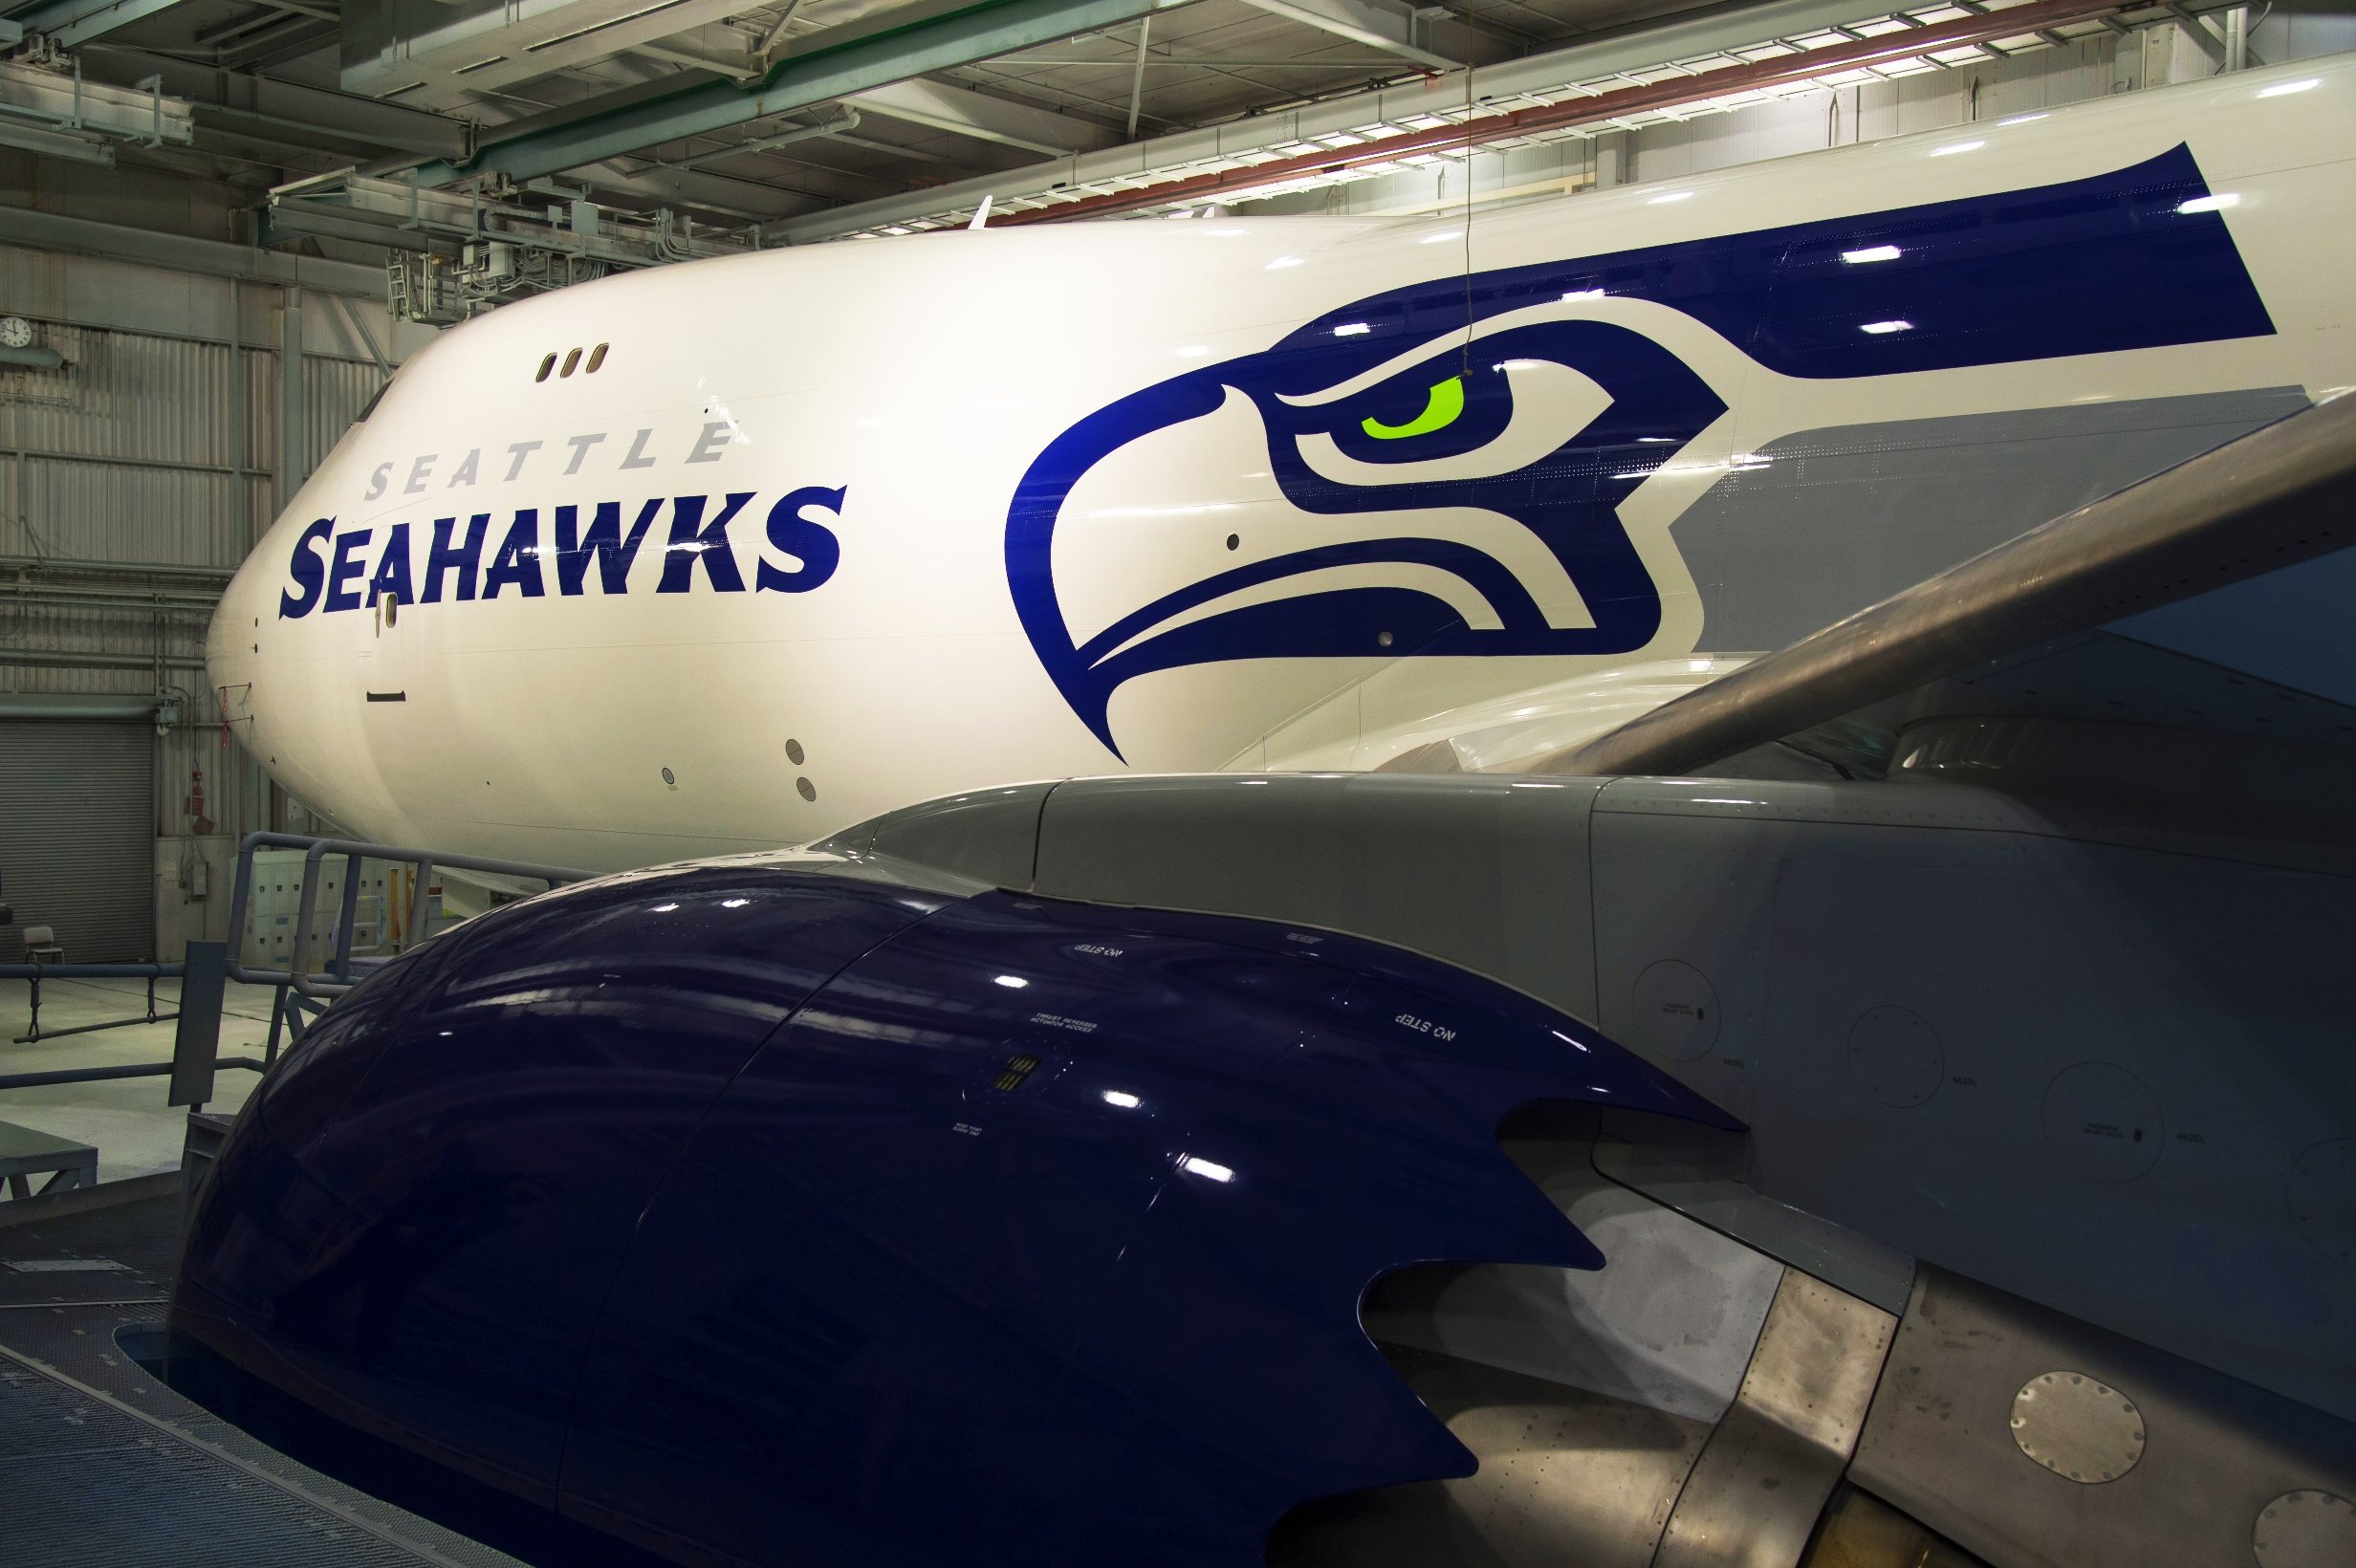 seattle, Seahawks, Nfl, Football, Airliner, Beoing Wallpaper